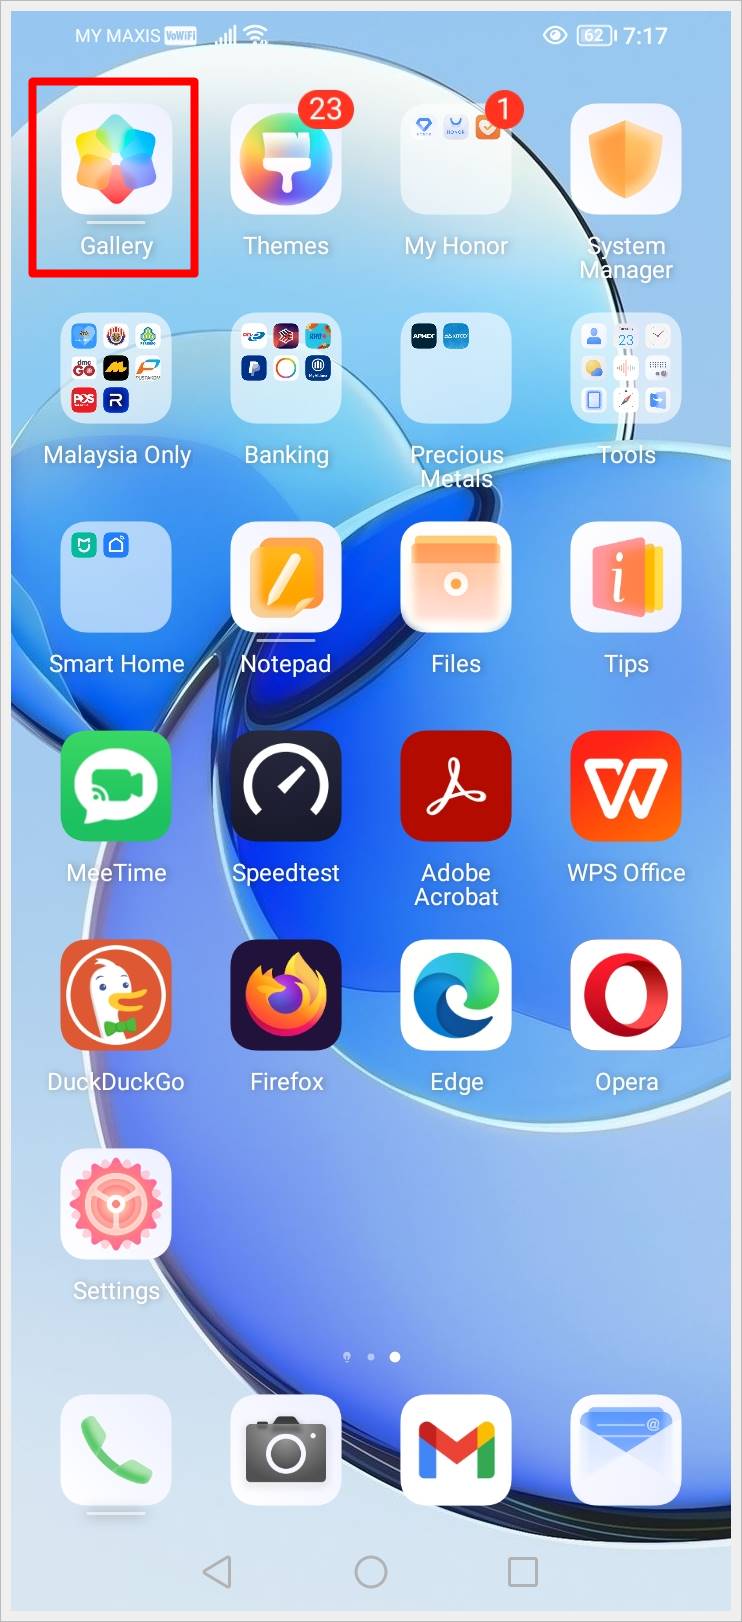 This image shows a screenshot of an Android phone with its 'Gallery' app's icon highlighted.